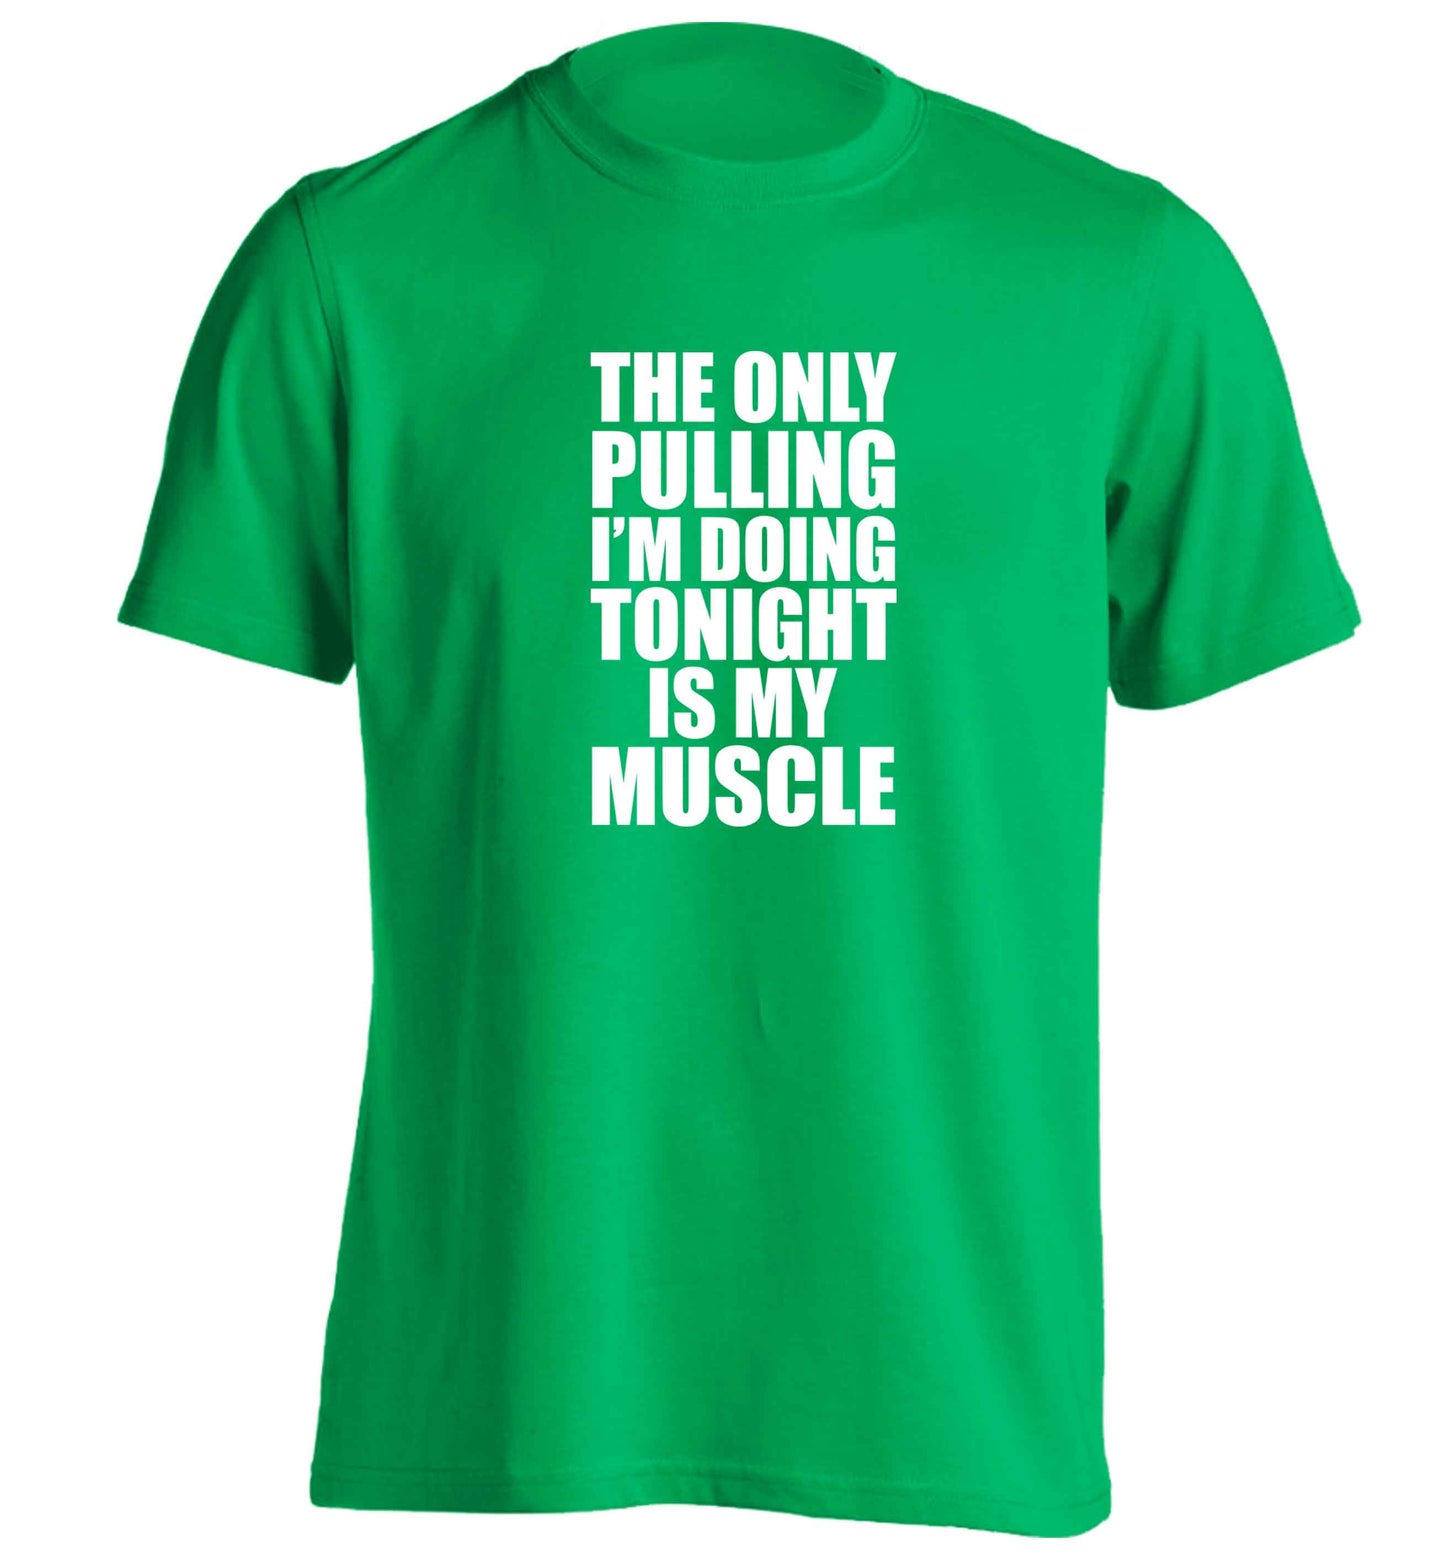 The only pulling I'm doing tonight is my muscle adults unisex green Tshirt 2XL